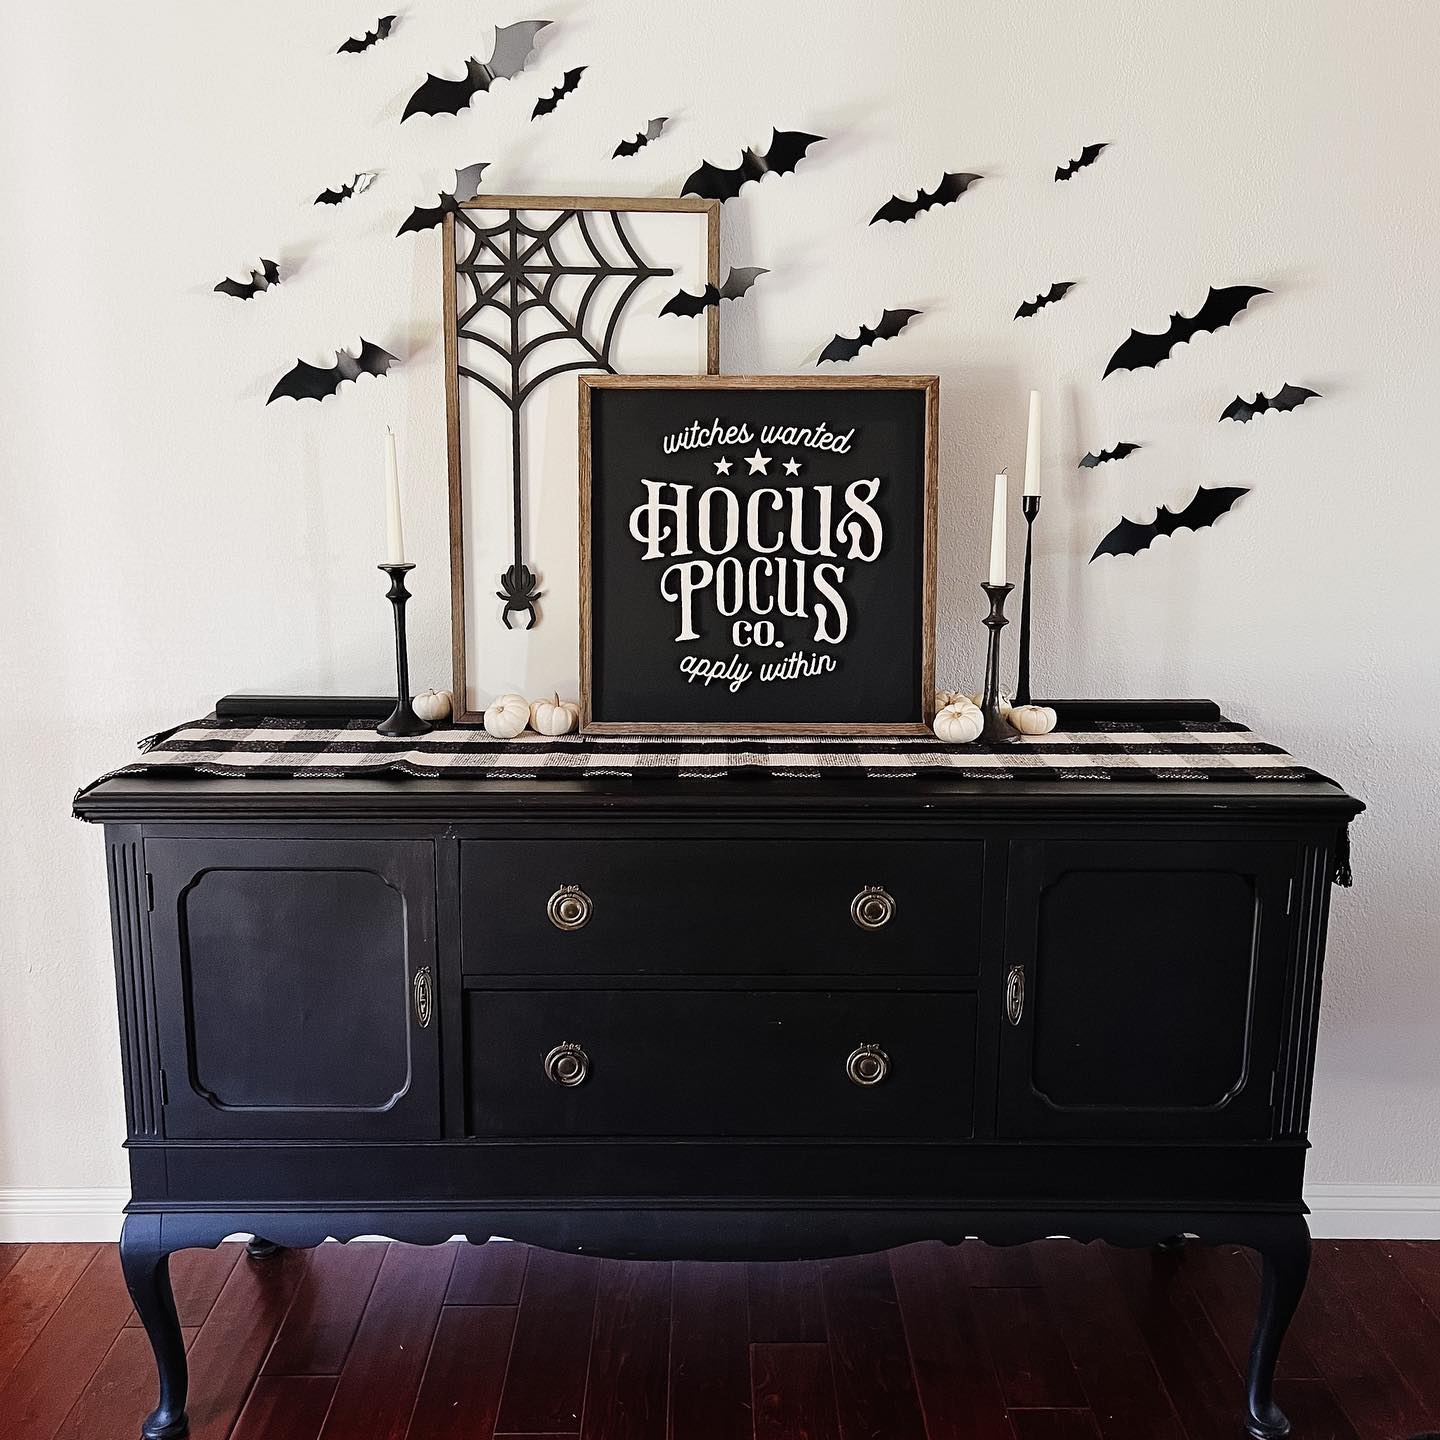 Just a little bit of Hocus Pocus! 

Follow my shop @thisrusticsoul on the @shop.LTK app to shop this post and get my exclusive app-only content!

#liketkit #LTKHalloween #LTKHoliday #LTKSeasonal #halloweendecor #hocuspocus #bats #halloween 
@shop.ltk
https://liketk.it/3RR7U